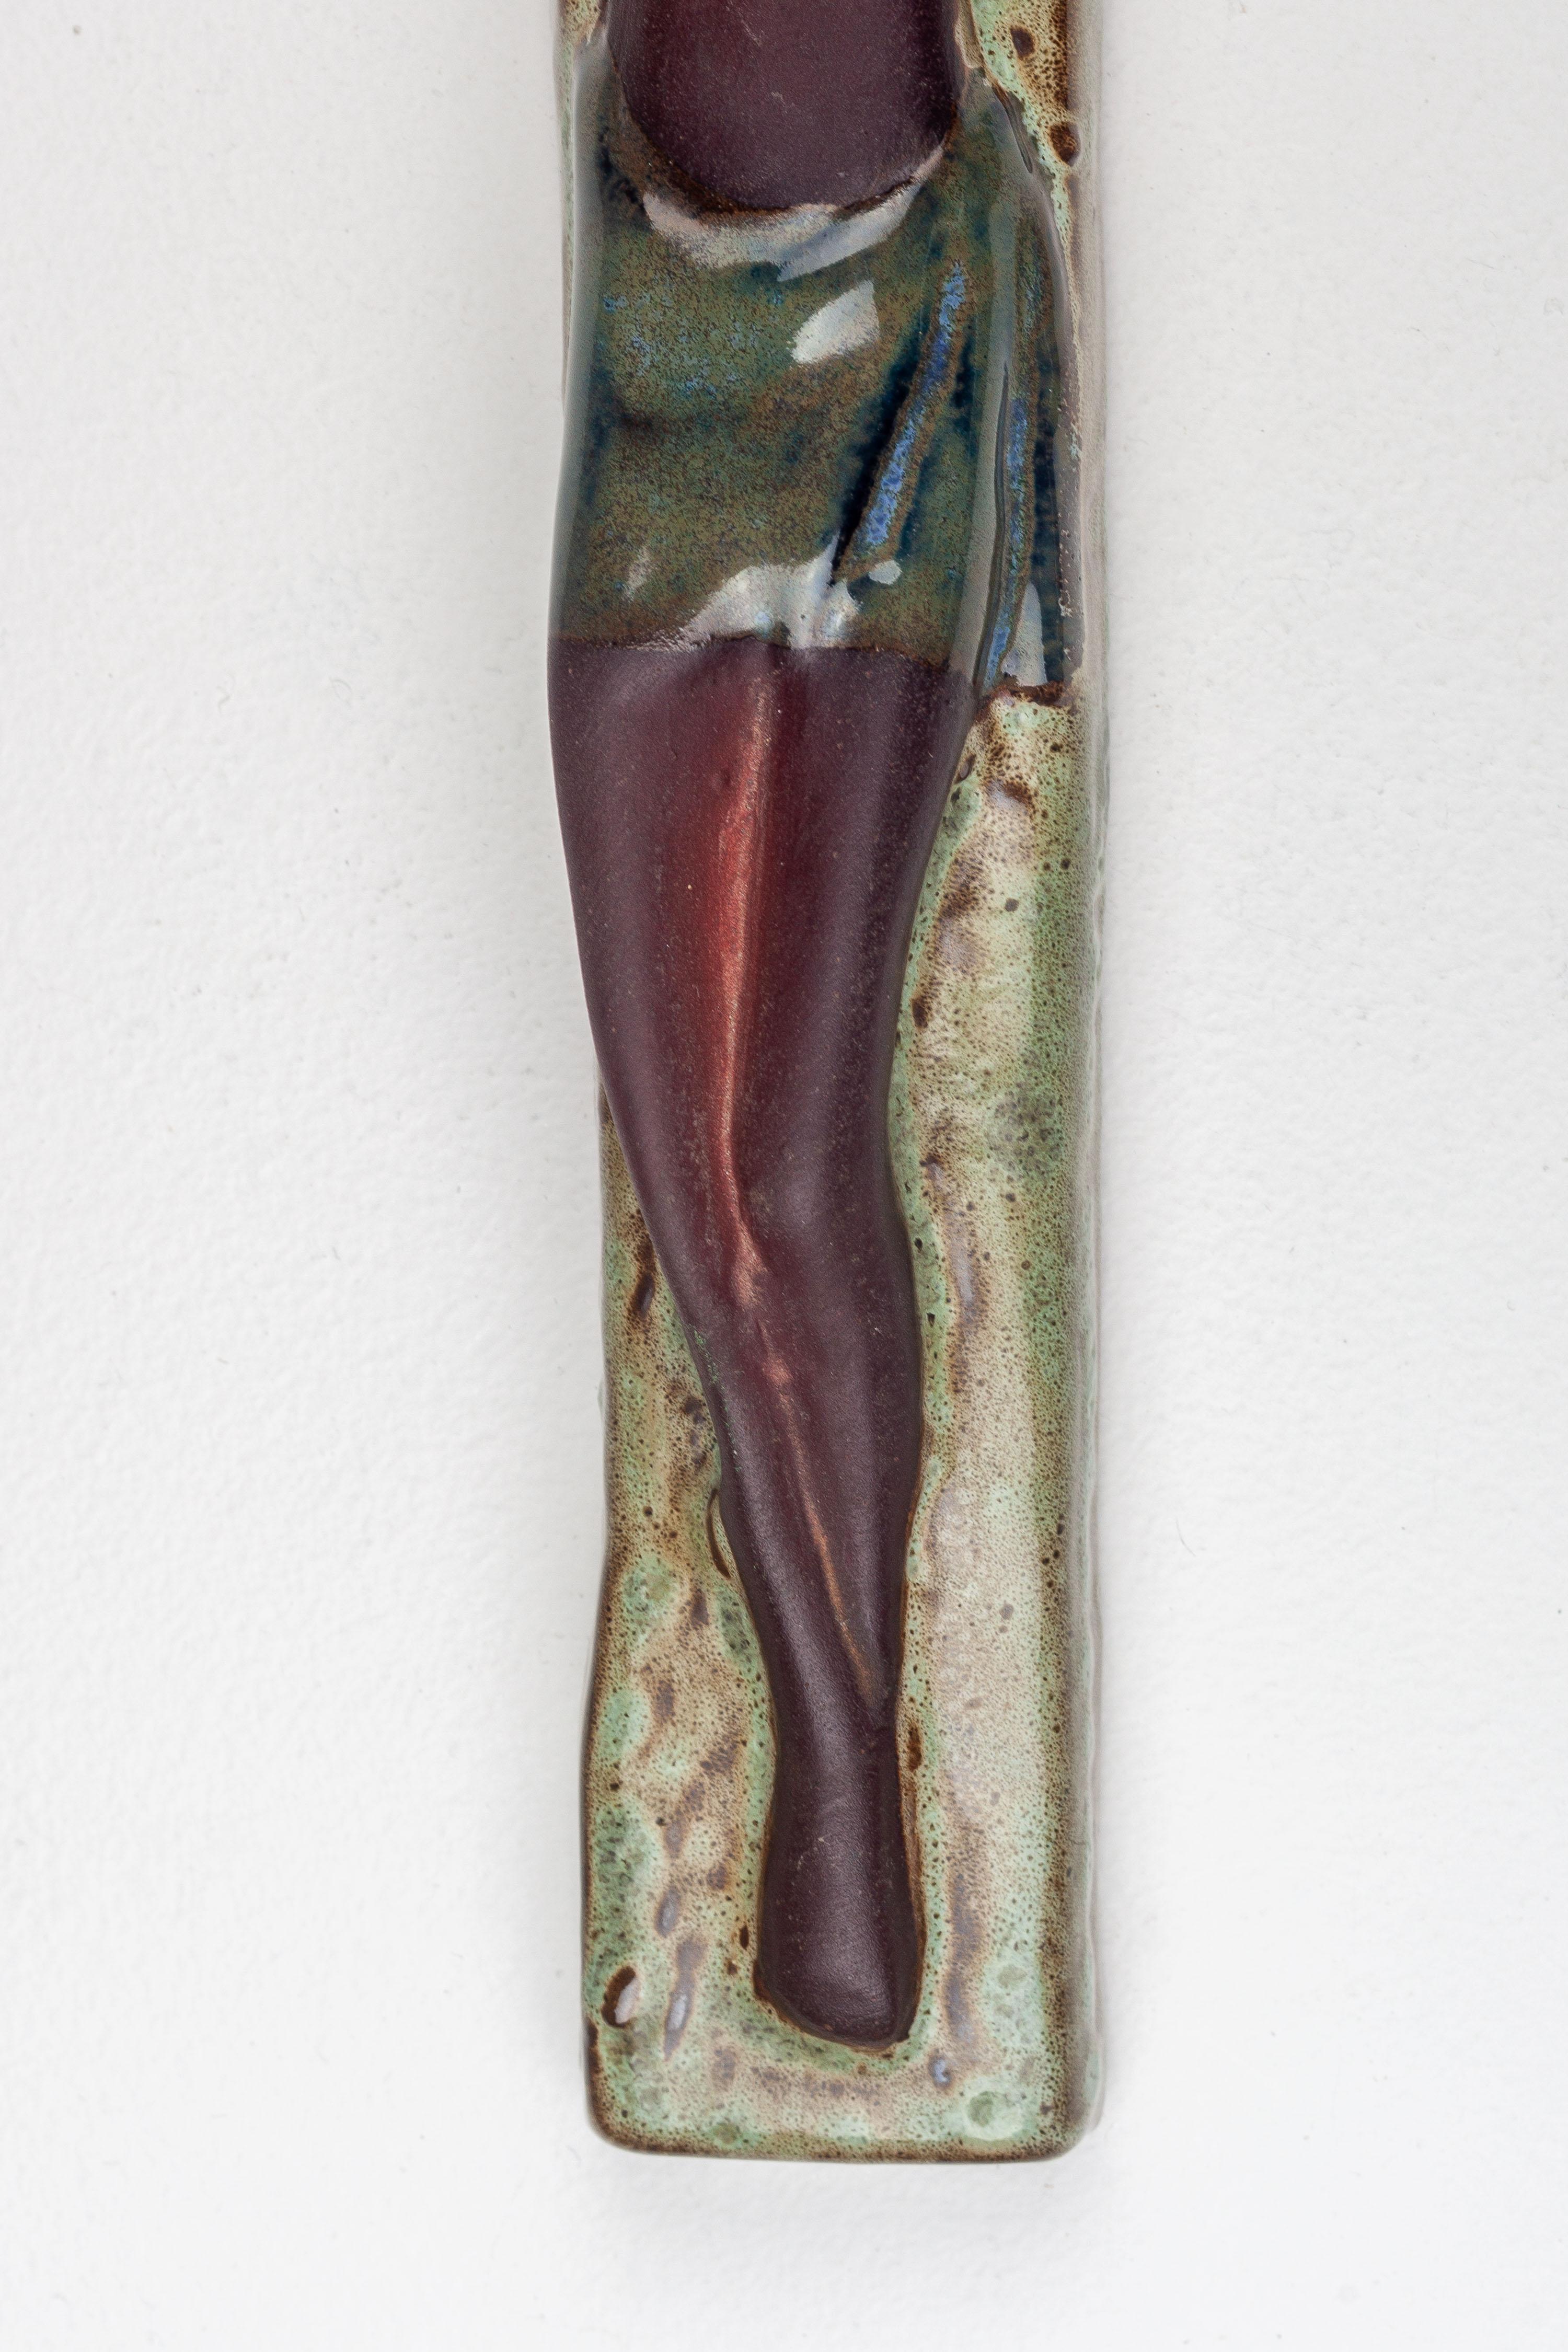 16-Inch Modernist Studio Pottery Wall Crucifix - Handmade in Europe In Good Condition For Sale In Chicago, IL